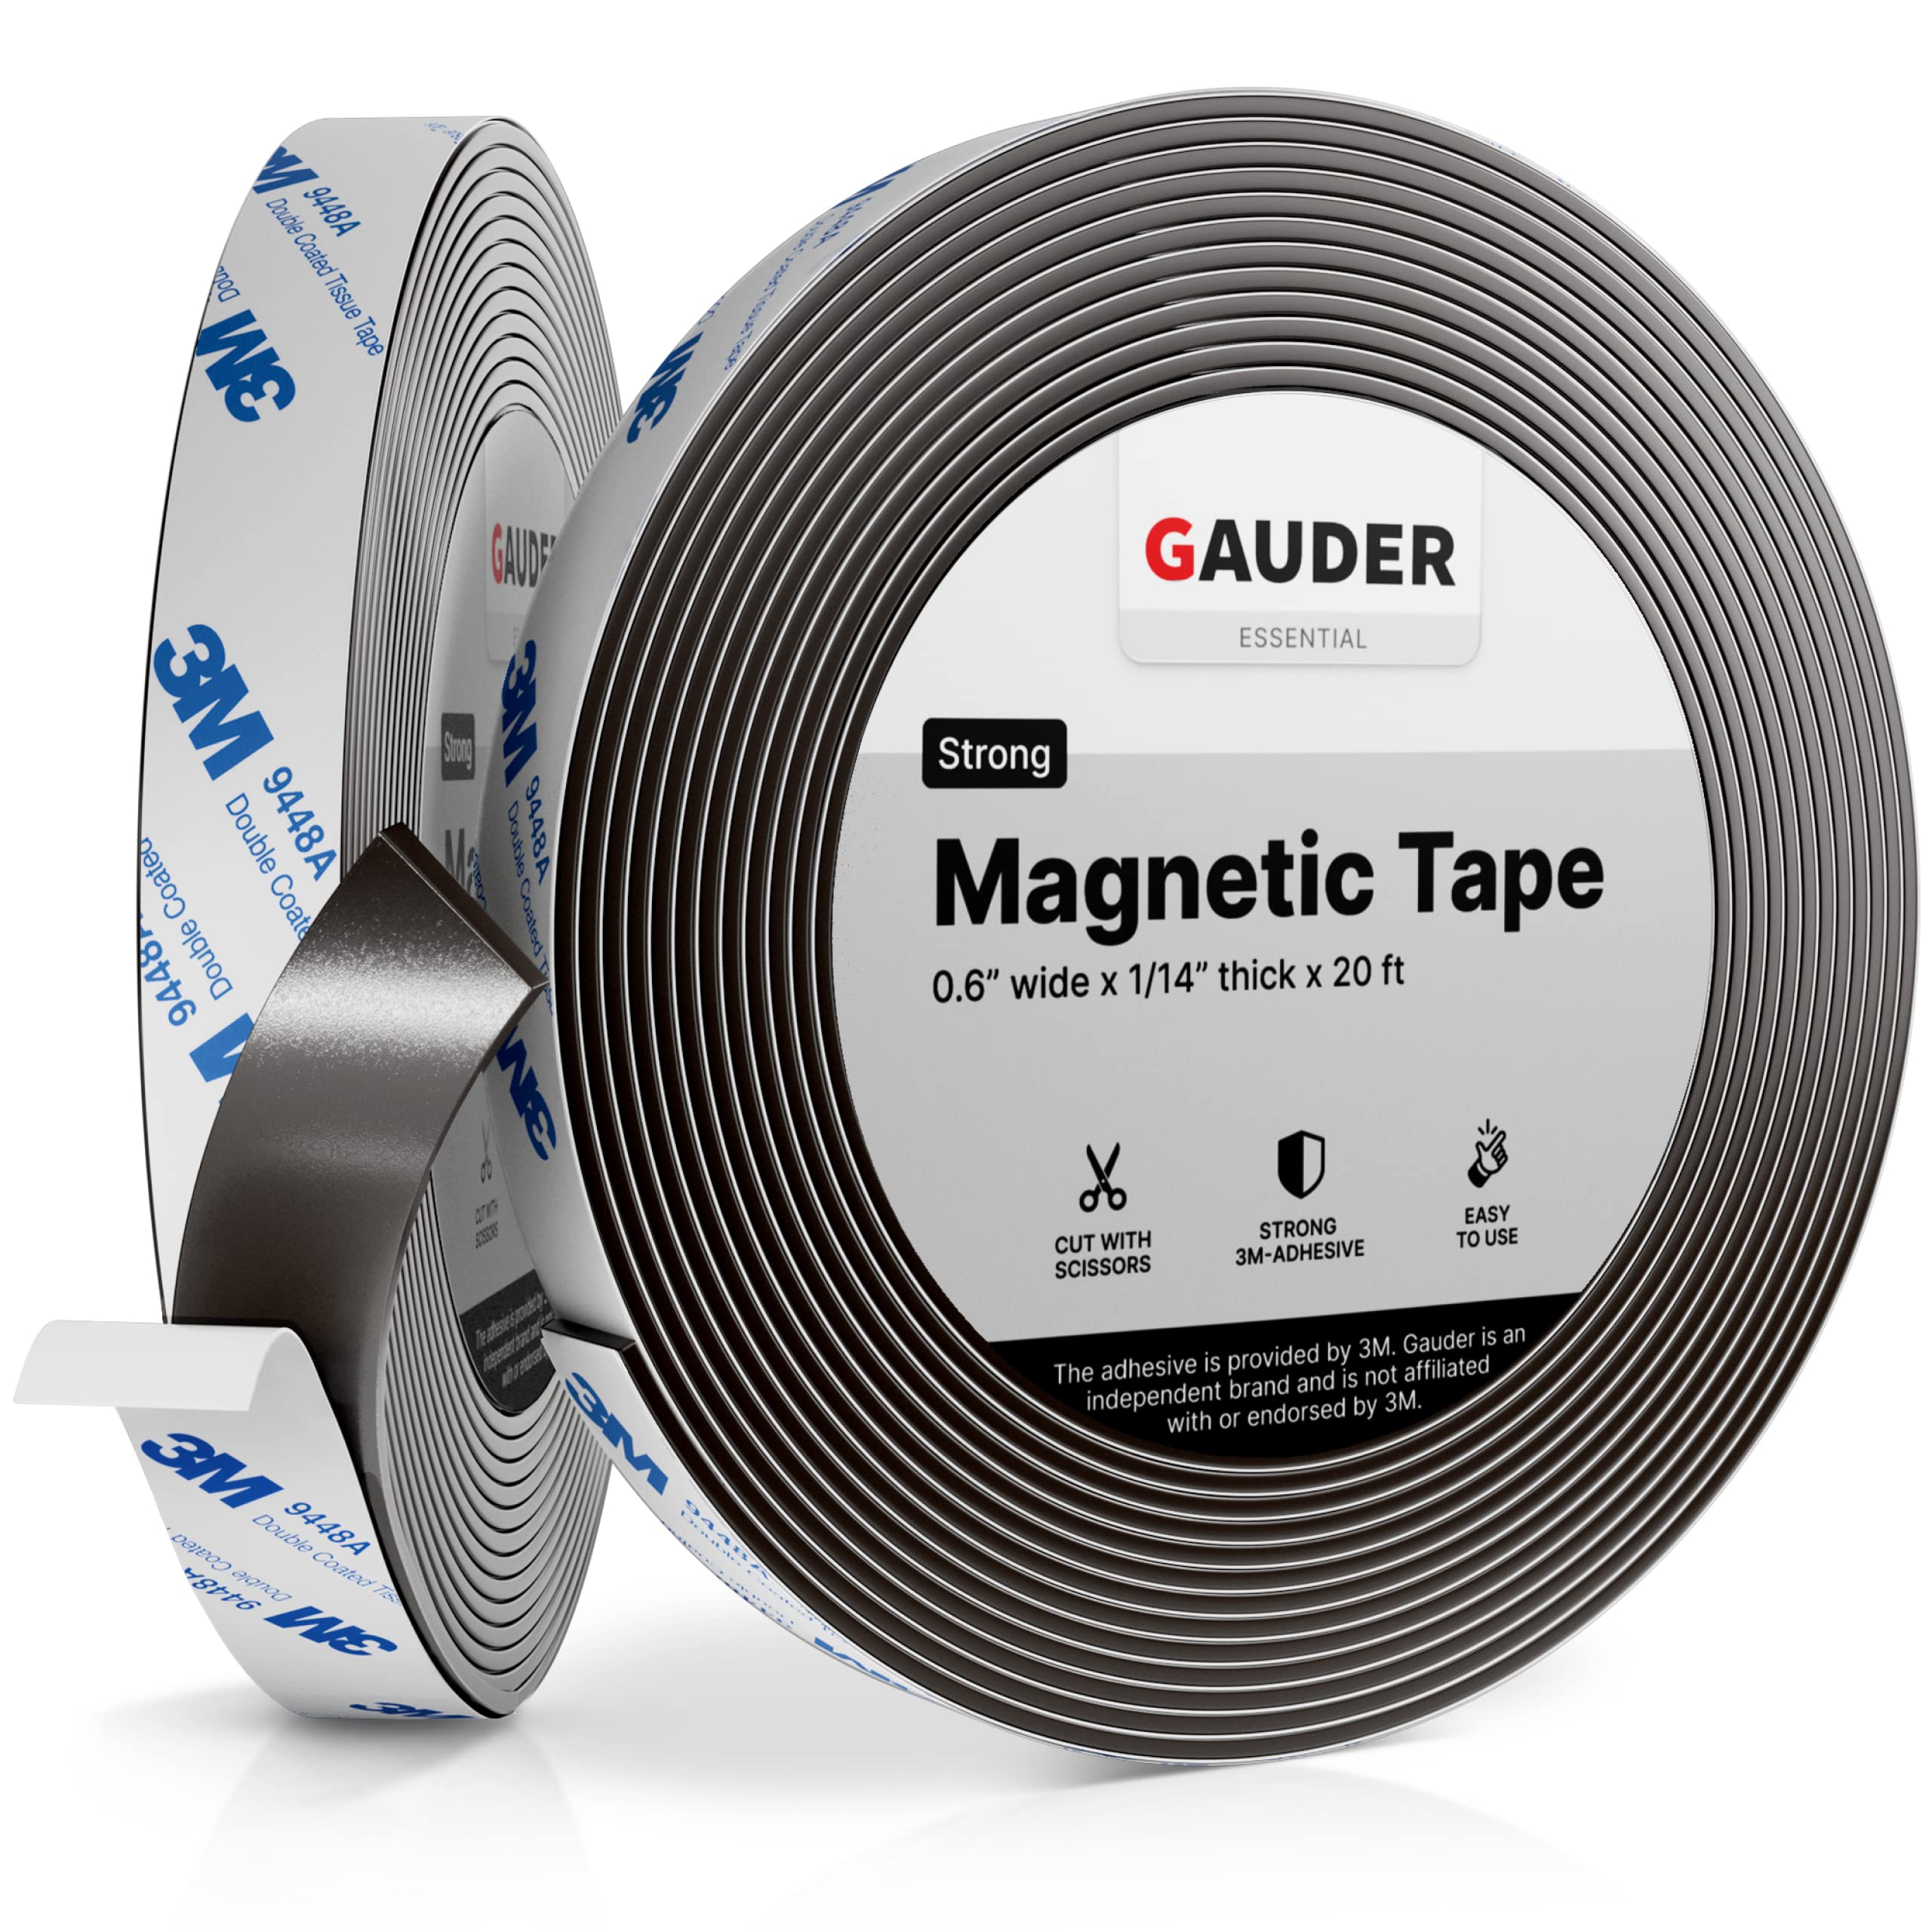 GAUDER BI-MY64-E7Y3 gAUDER Strong Magnetic Tape Self Adhesive (20 Feet Long  x 06 Inch Wide) Magnetic Strips with Adhesive Backing Magnet Roll